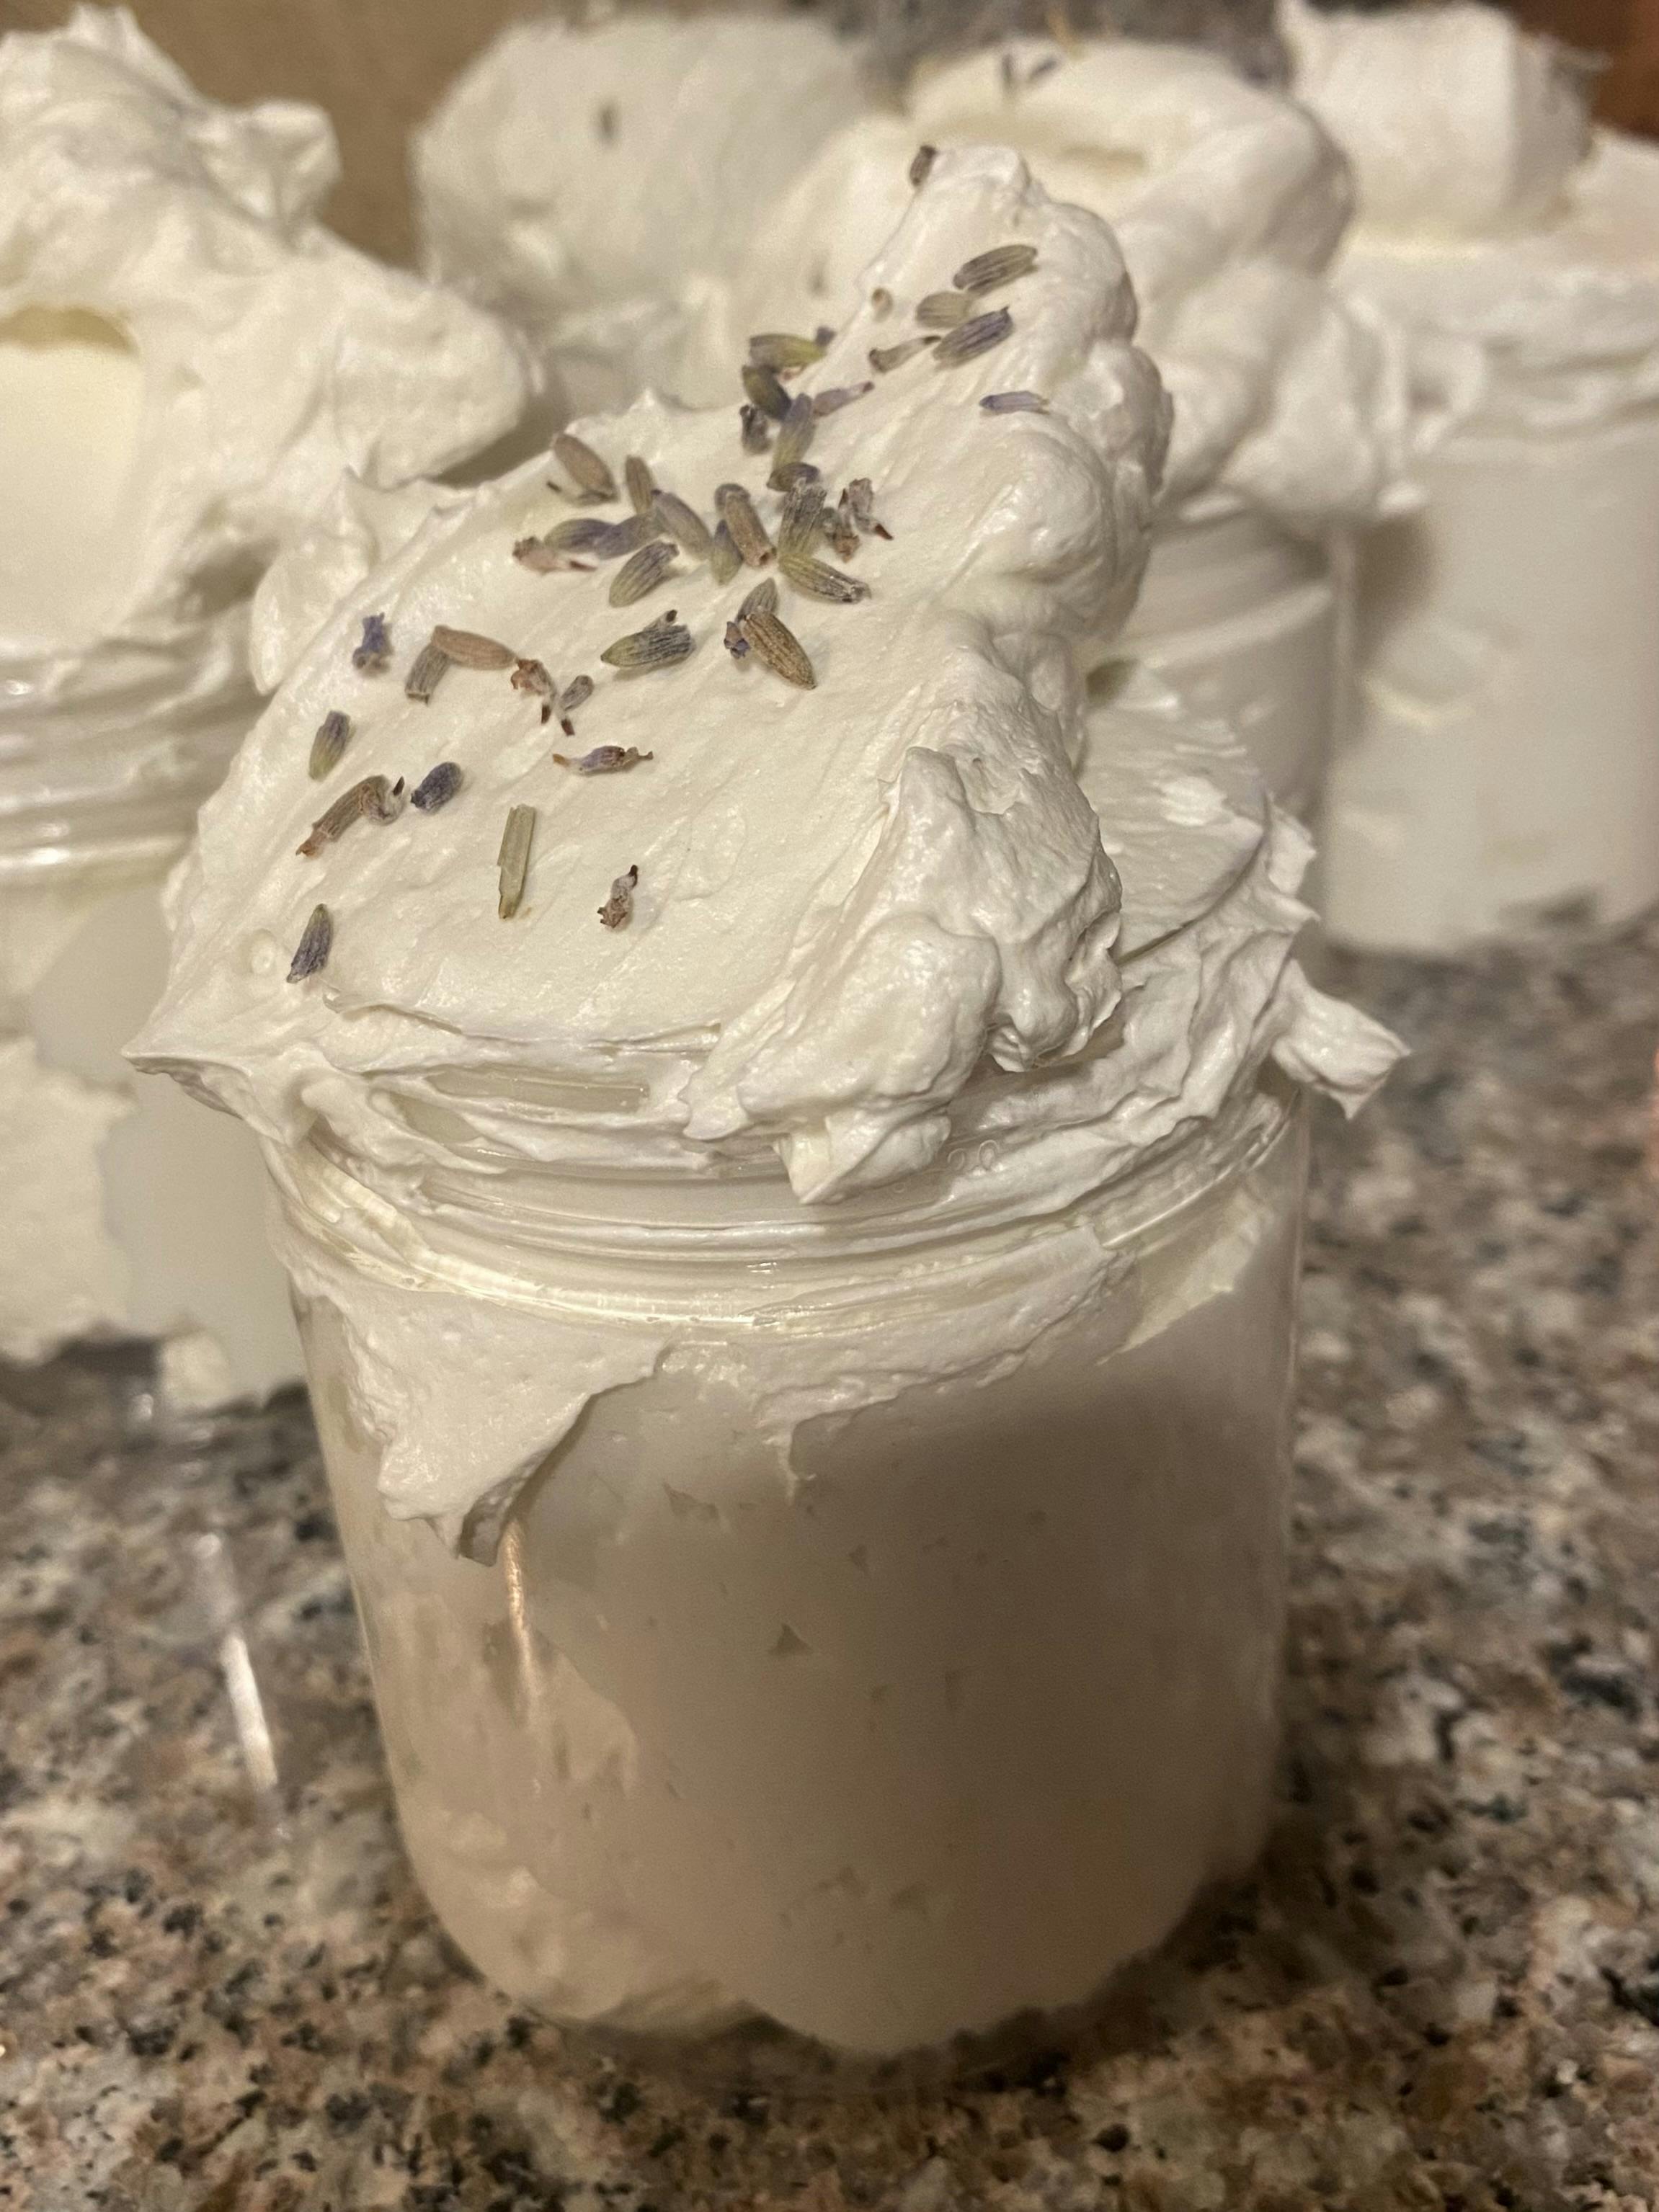 Flower and Herb Infused Whipped Body Butter